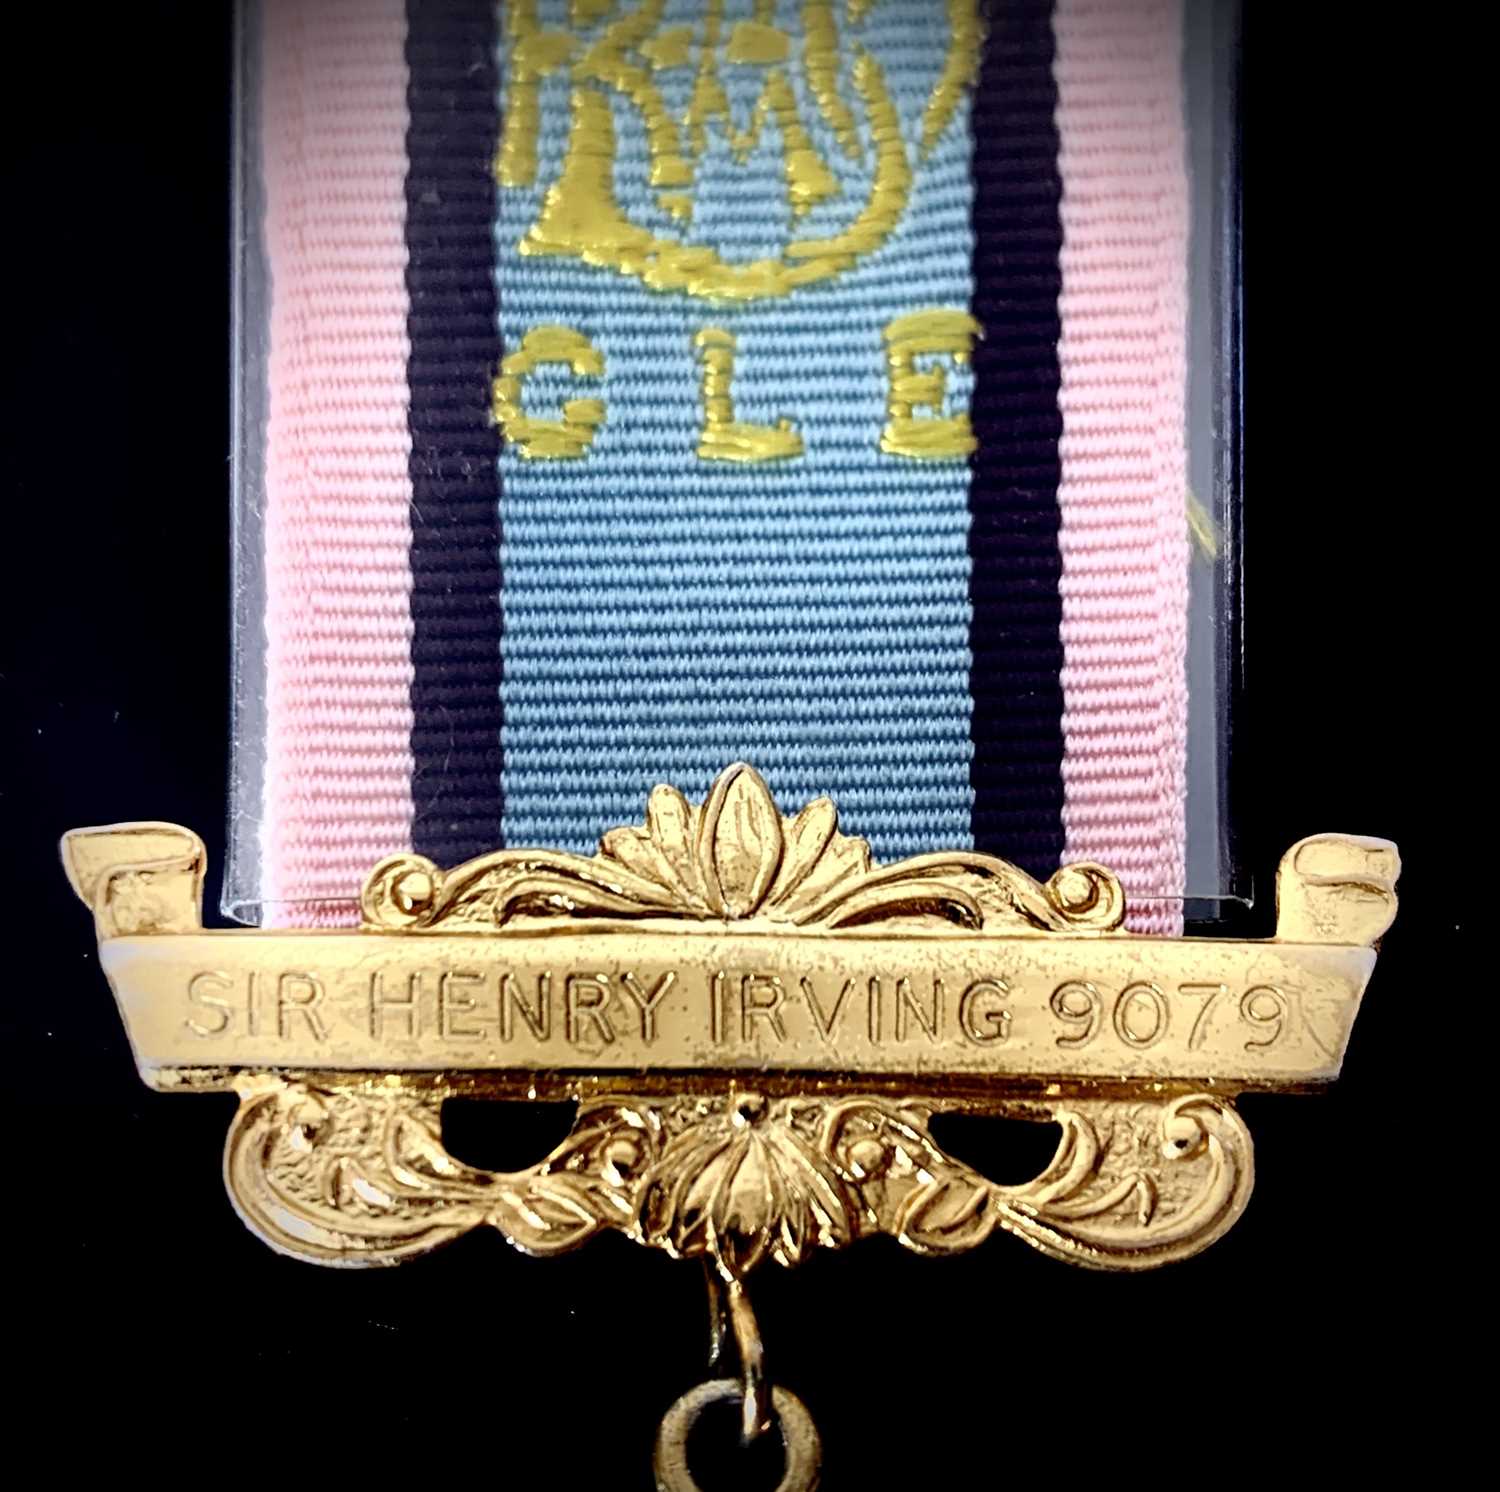 RAOB Medals - group of 5 to G.Ware 1960's - 1990's, 4 silver Sir Henry Irvine Lodge. - Image 8 of 16